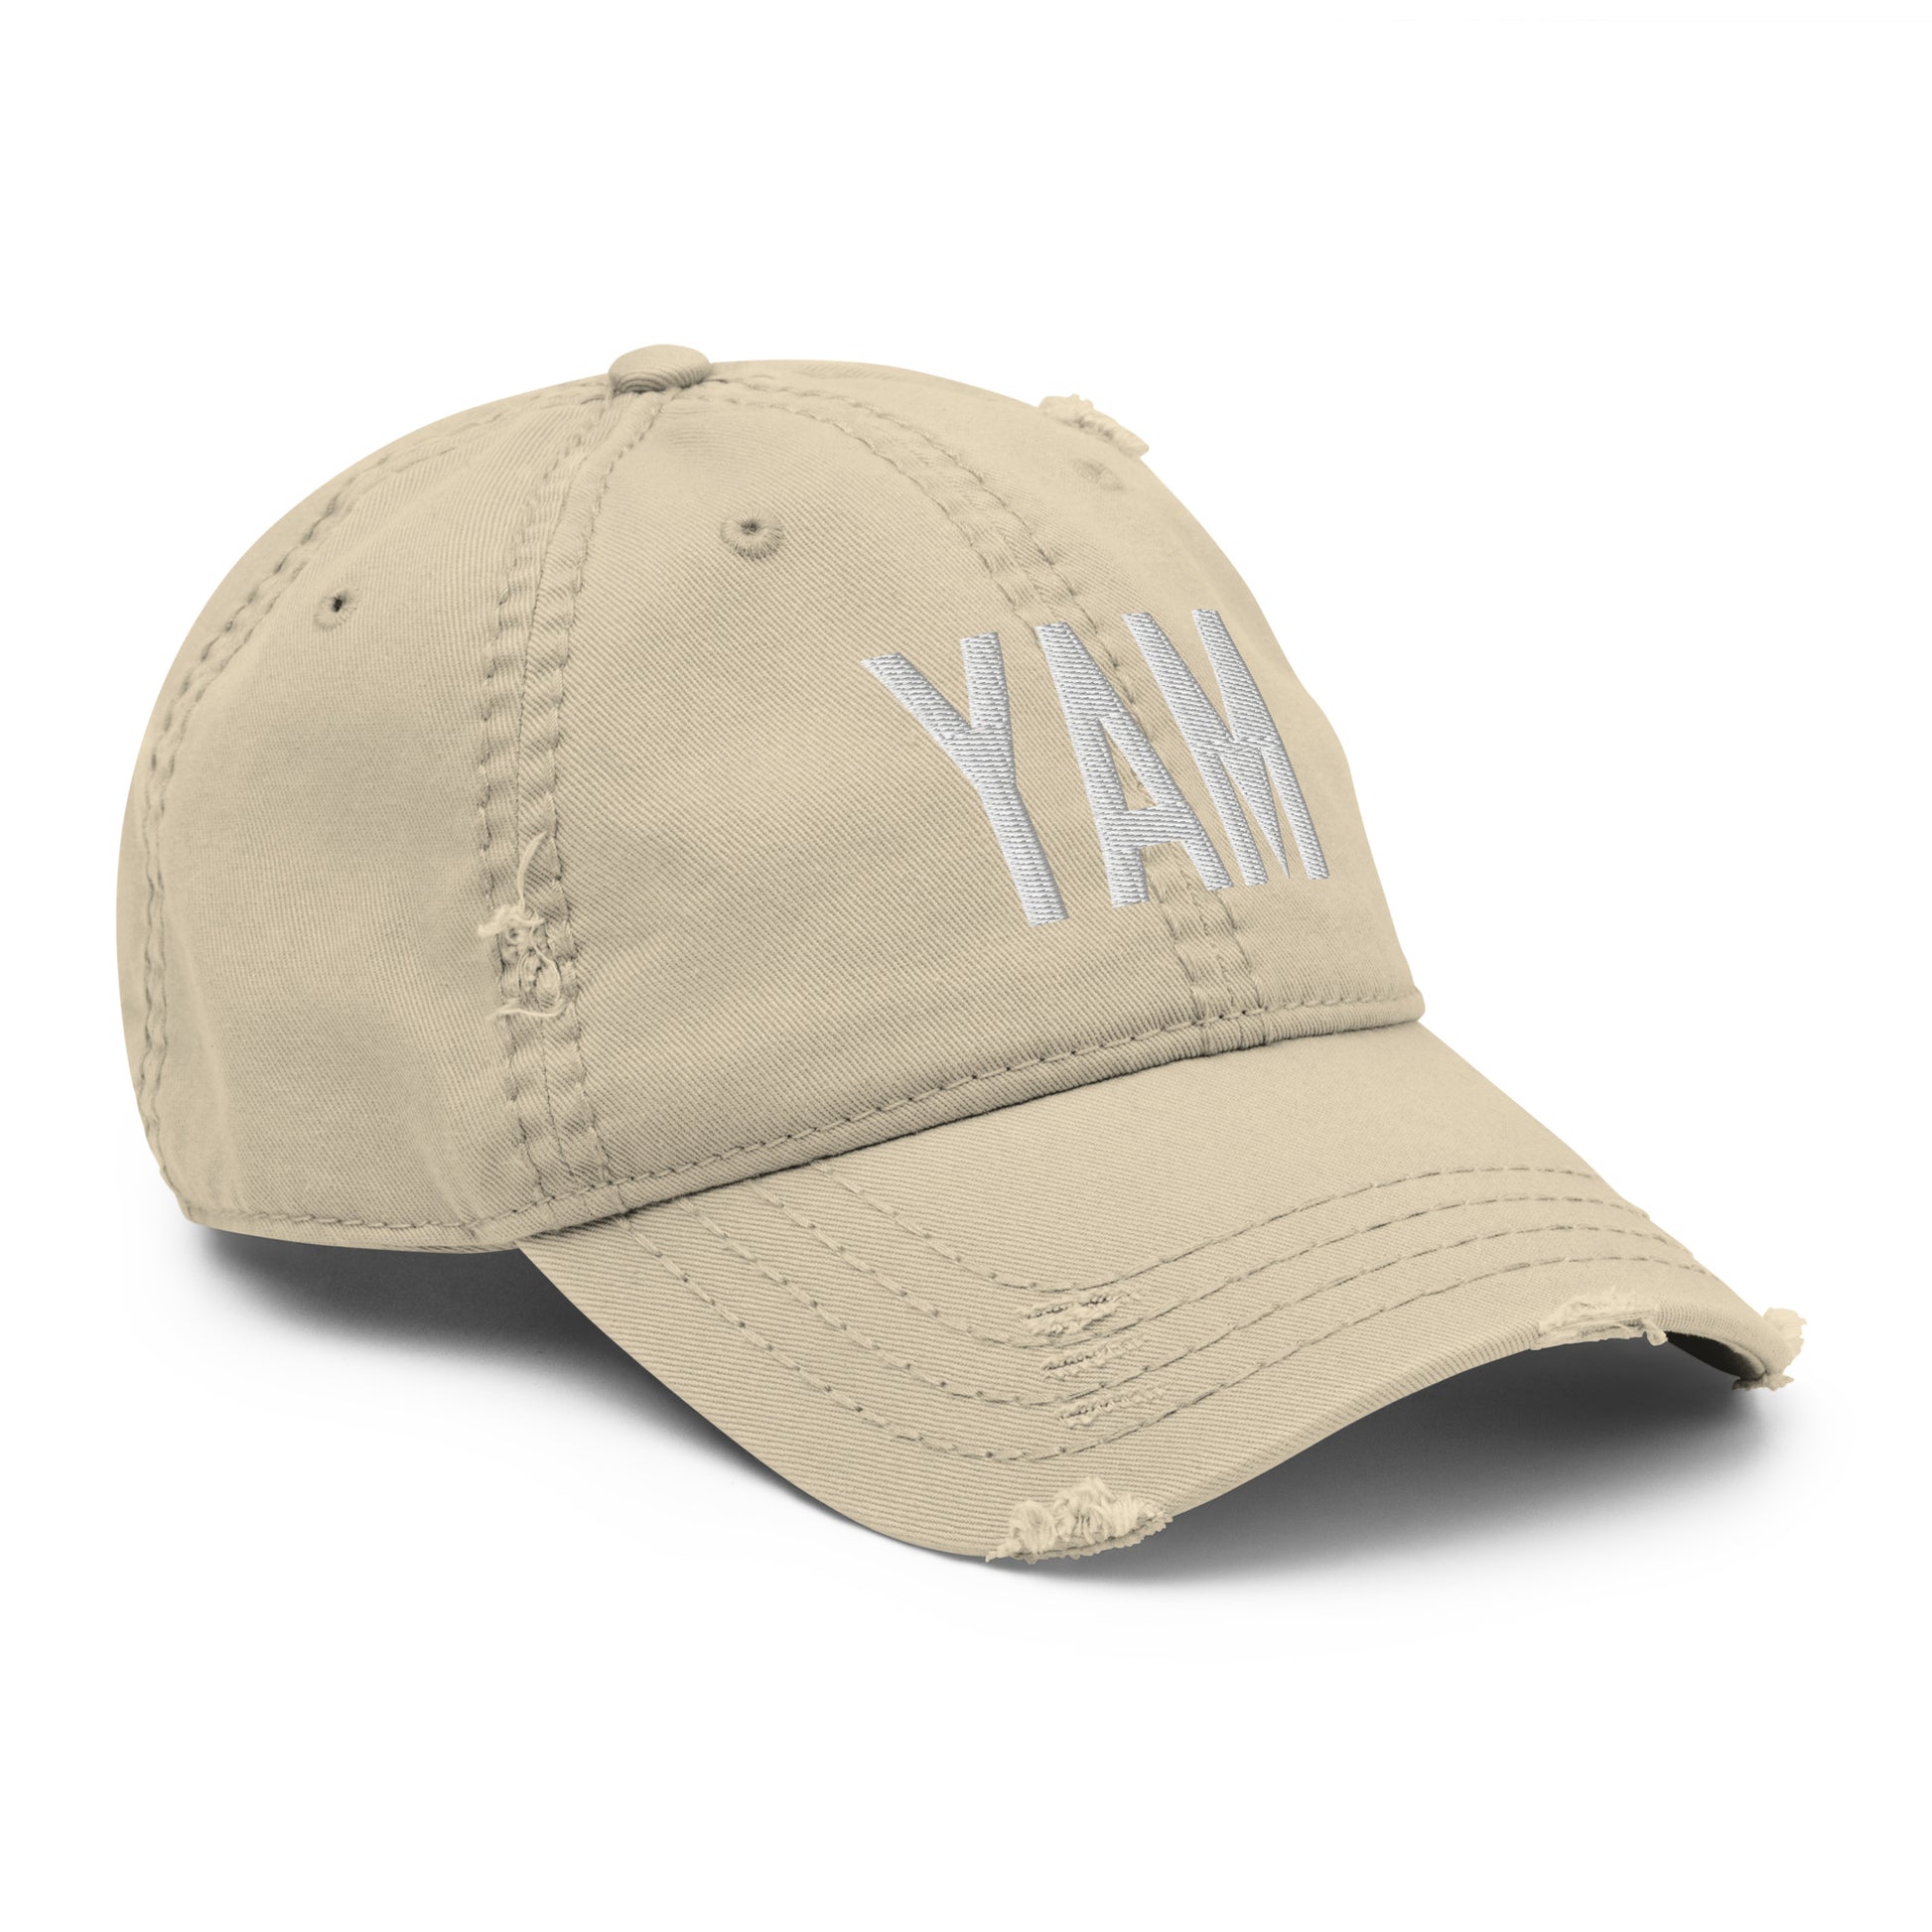 Airport Code Distressed Hat - White • YAM Sault-Ste-Marie • YHM Designs - Image 20